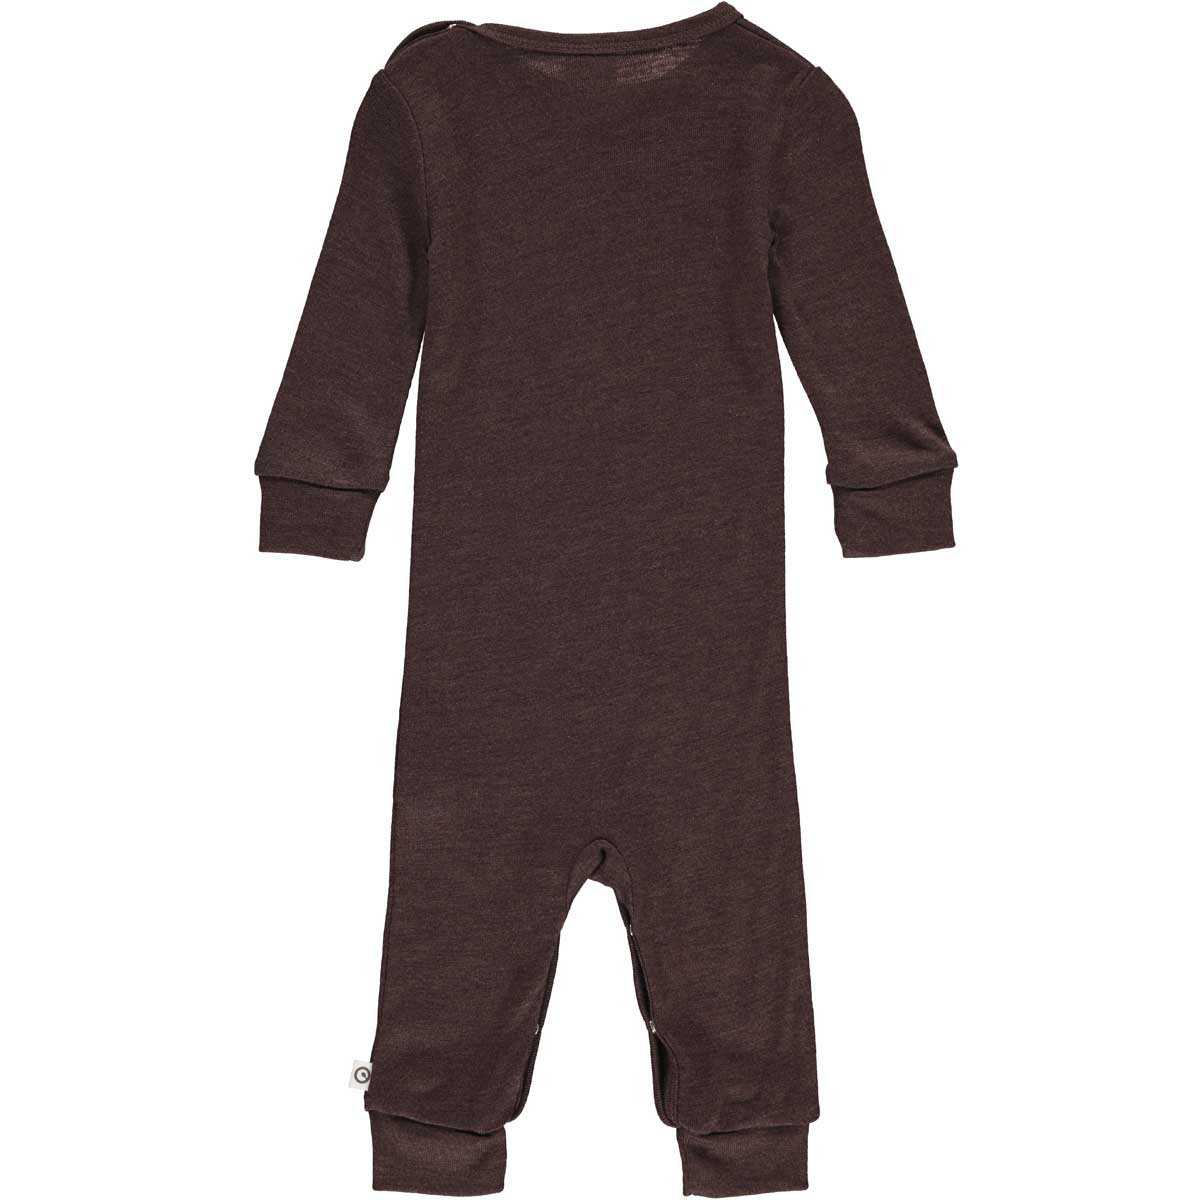 MAMA.LICIOUS Wool baby-one-piece suit - 1584052300